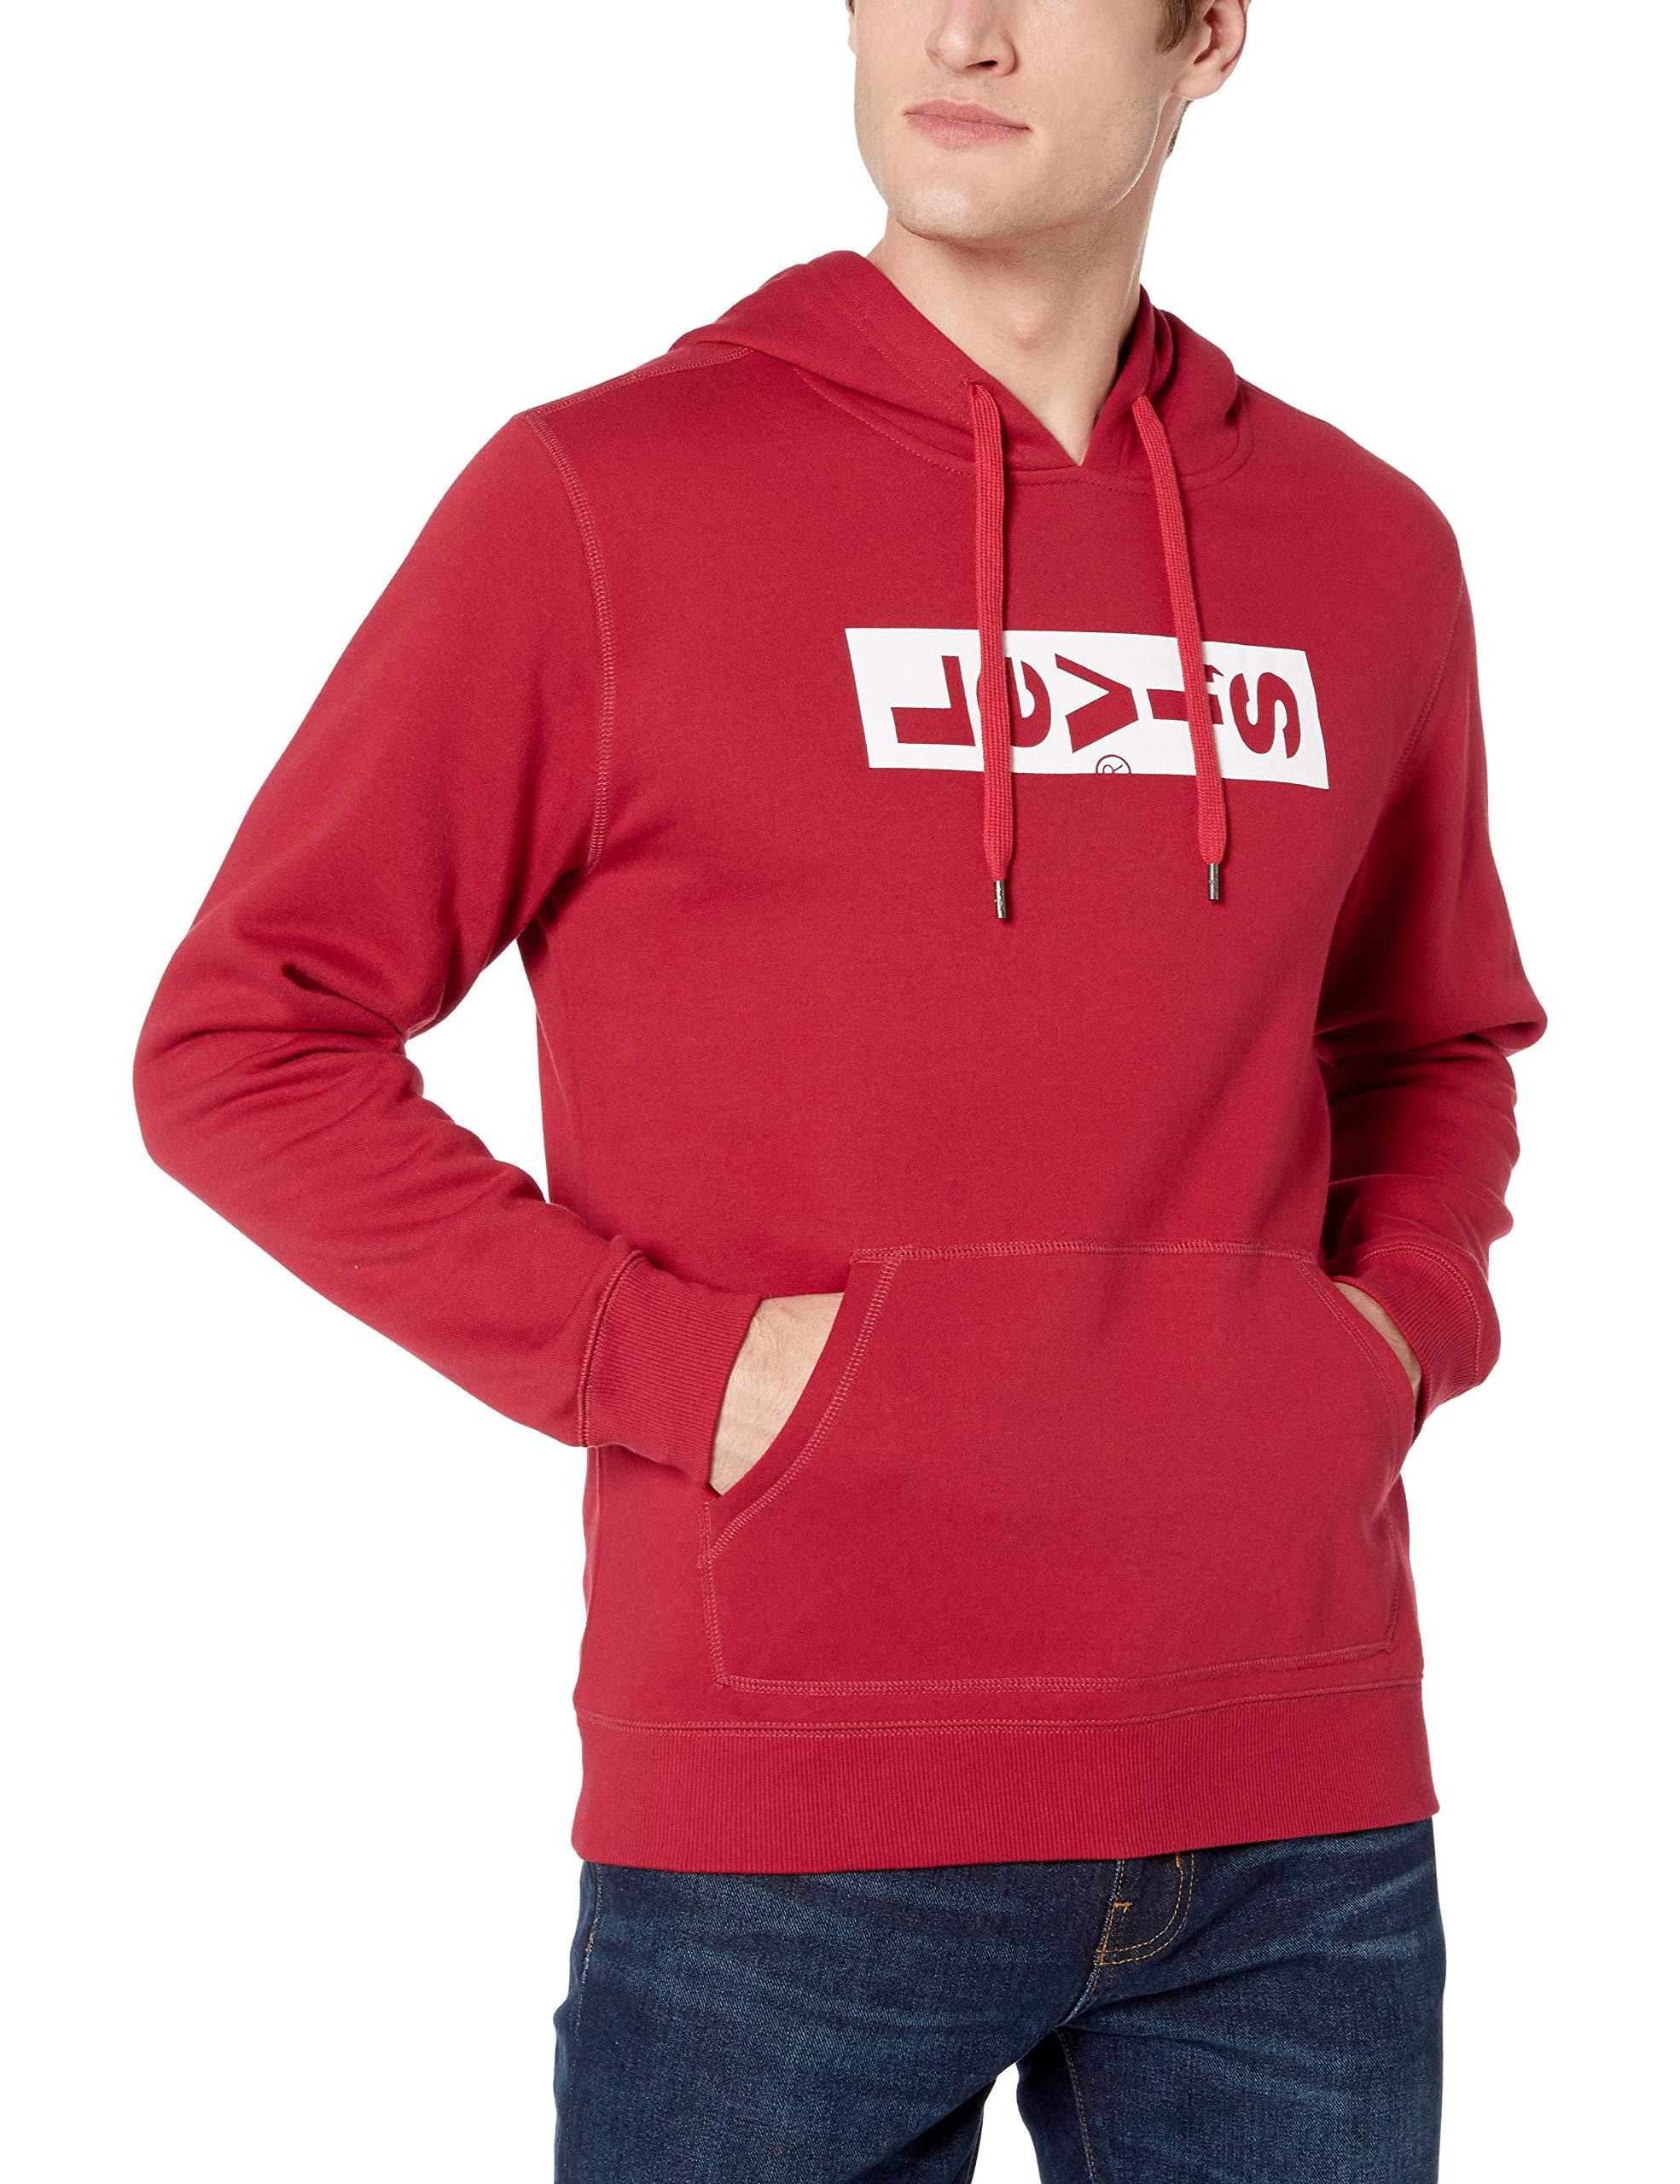 Levi's Classic Hoodie in Red for Men - Lyst